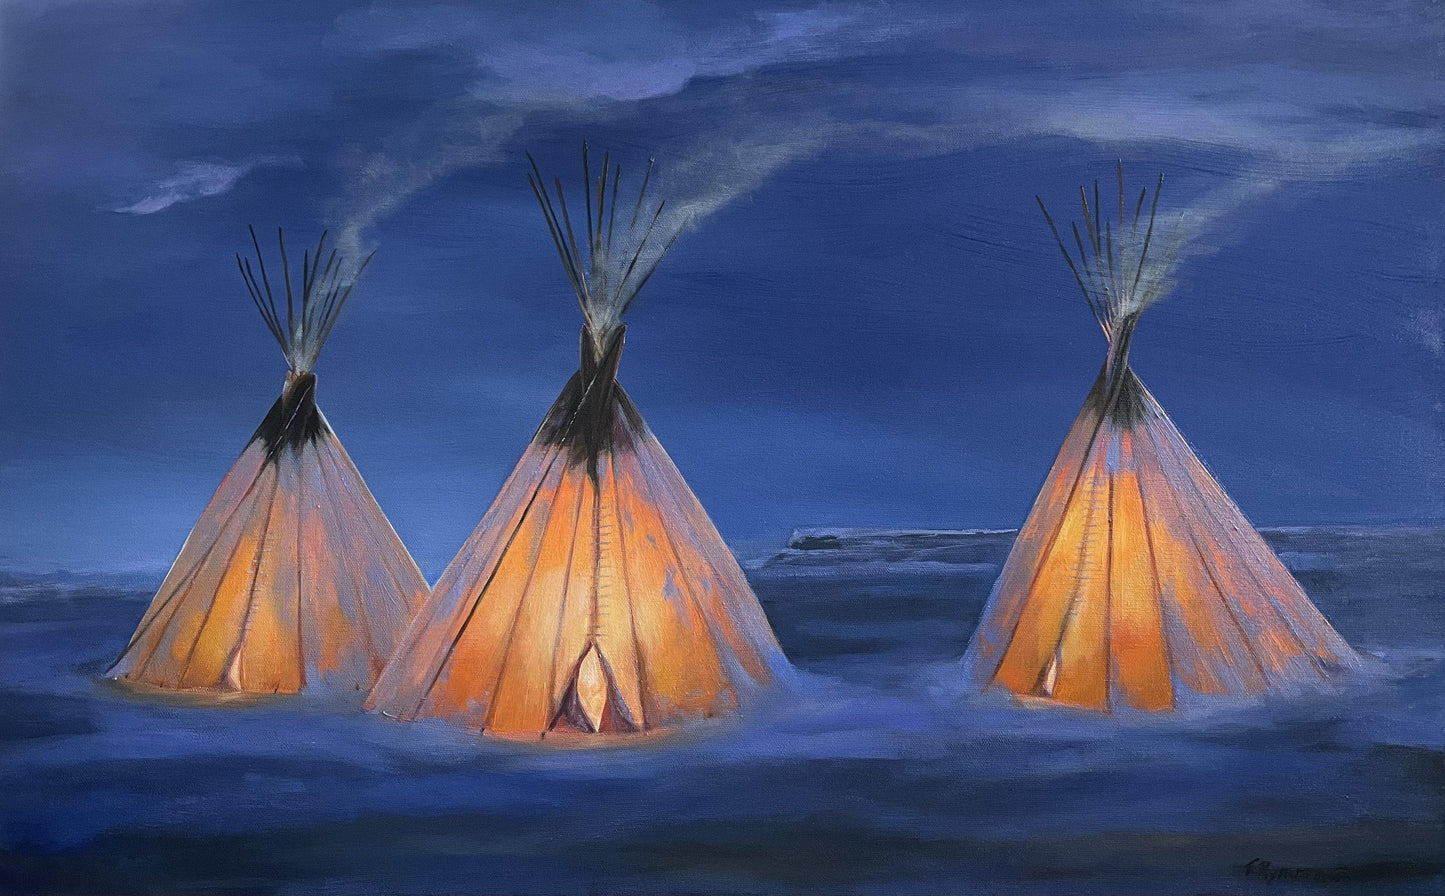 They’re Still in the Valley-Painting-Tamara Rymer-Sorrel Sky Gallery